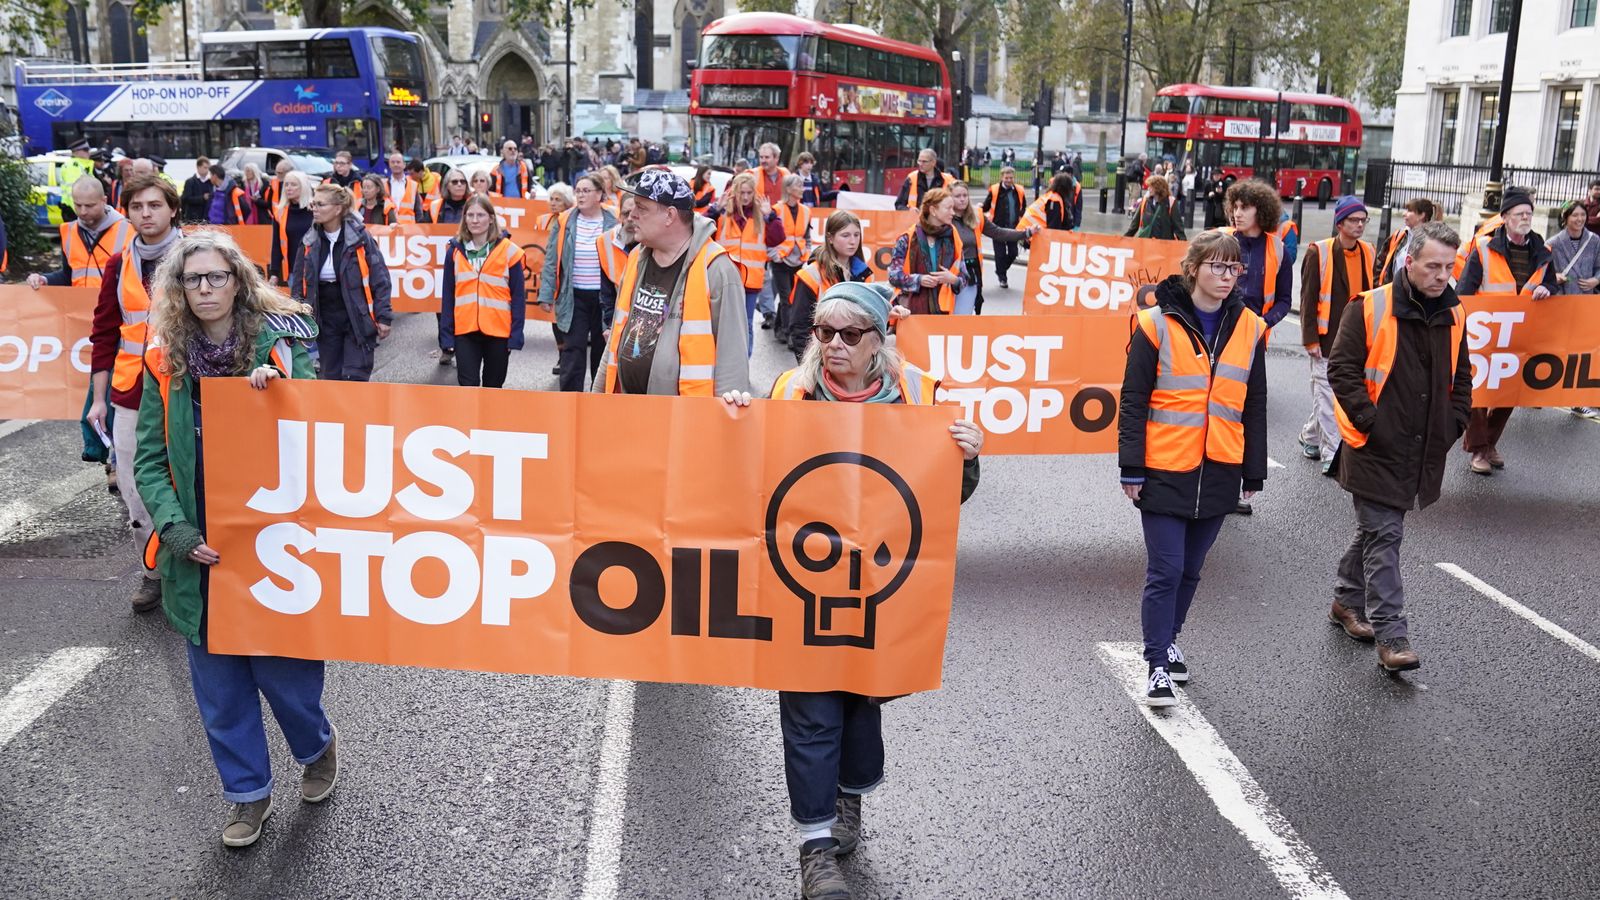 'The public has had enough': Police condemn Just Stop Oil after 60 arrested